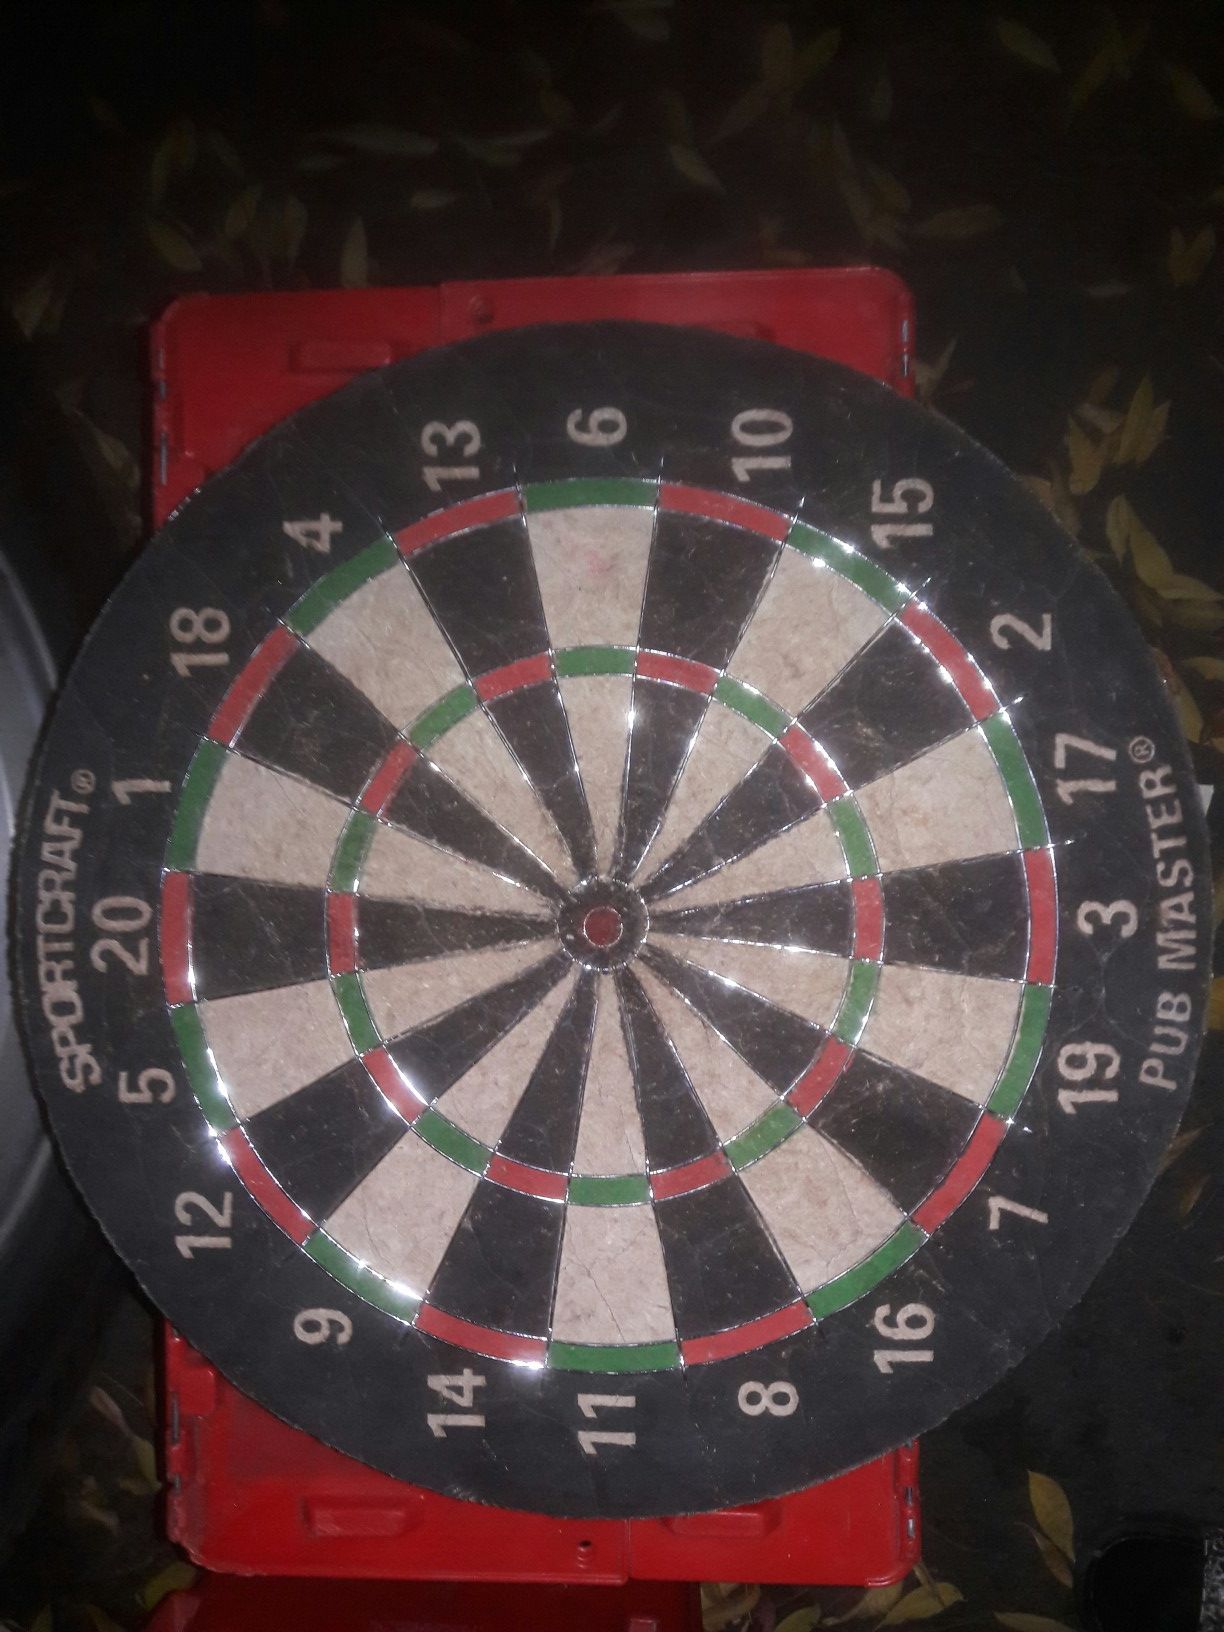 Cork board comes with 2 sets of darts